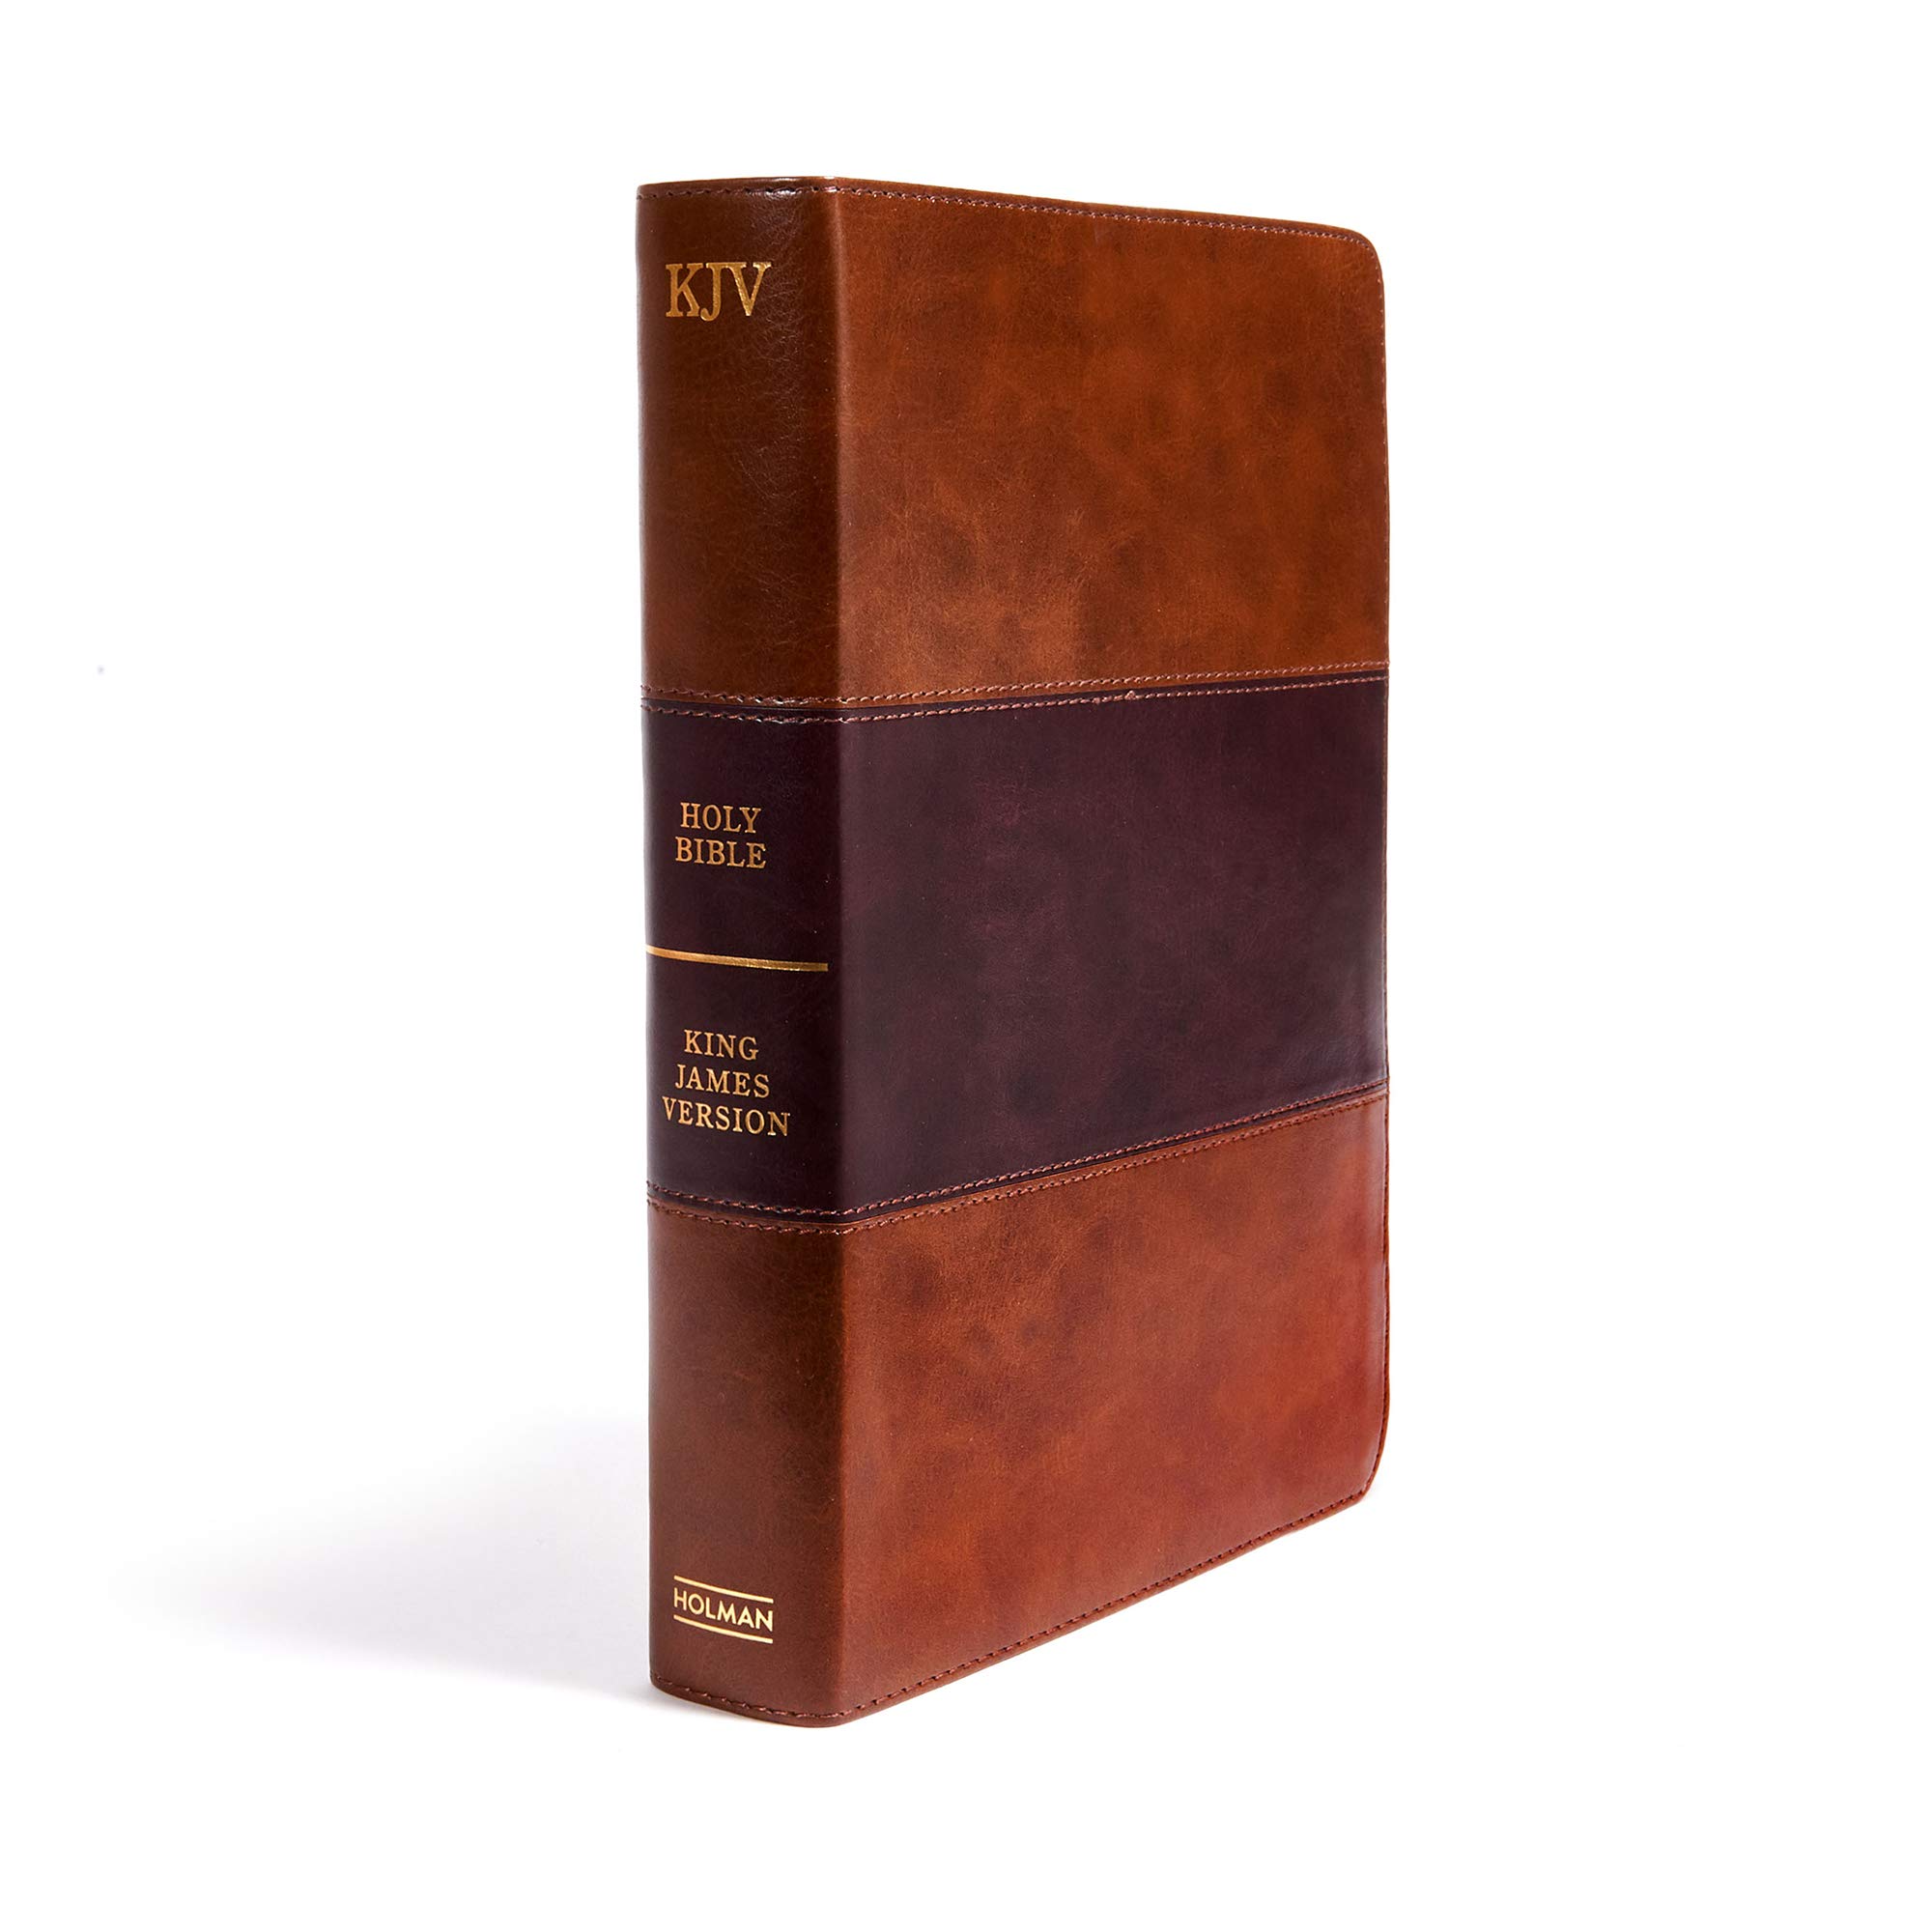 KJV Super Giant Print Reference Bible, Saddle Brown LeatherTouch, Indexed, Red Letter, Pure Cambridge Text, Presentation Page, Cross-References, Full-Color Maps, Easy-to-Read Bible MCM Type